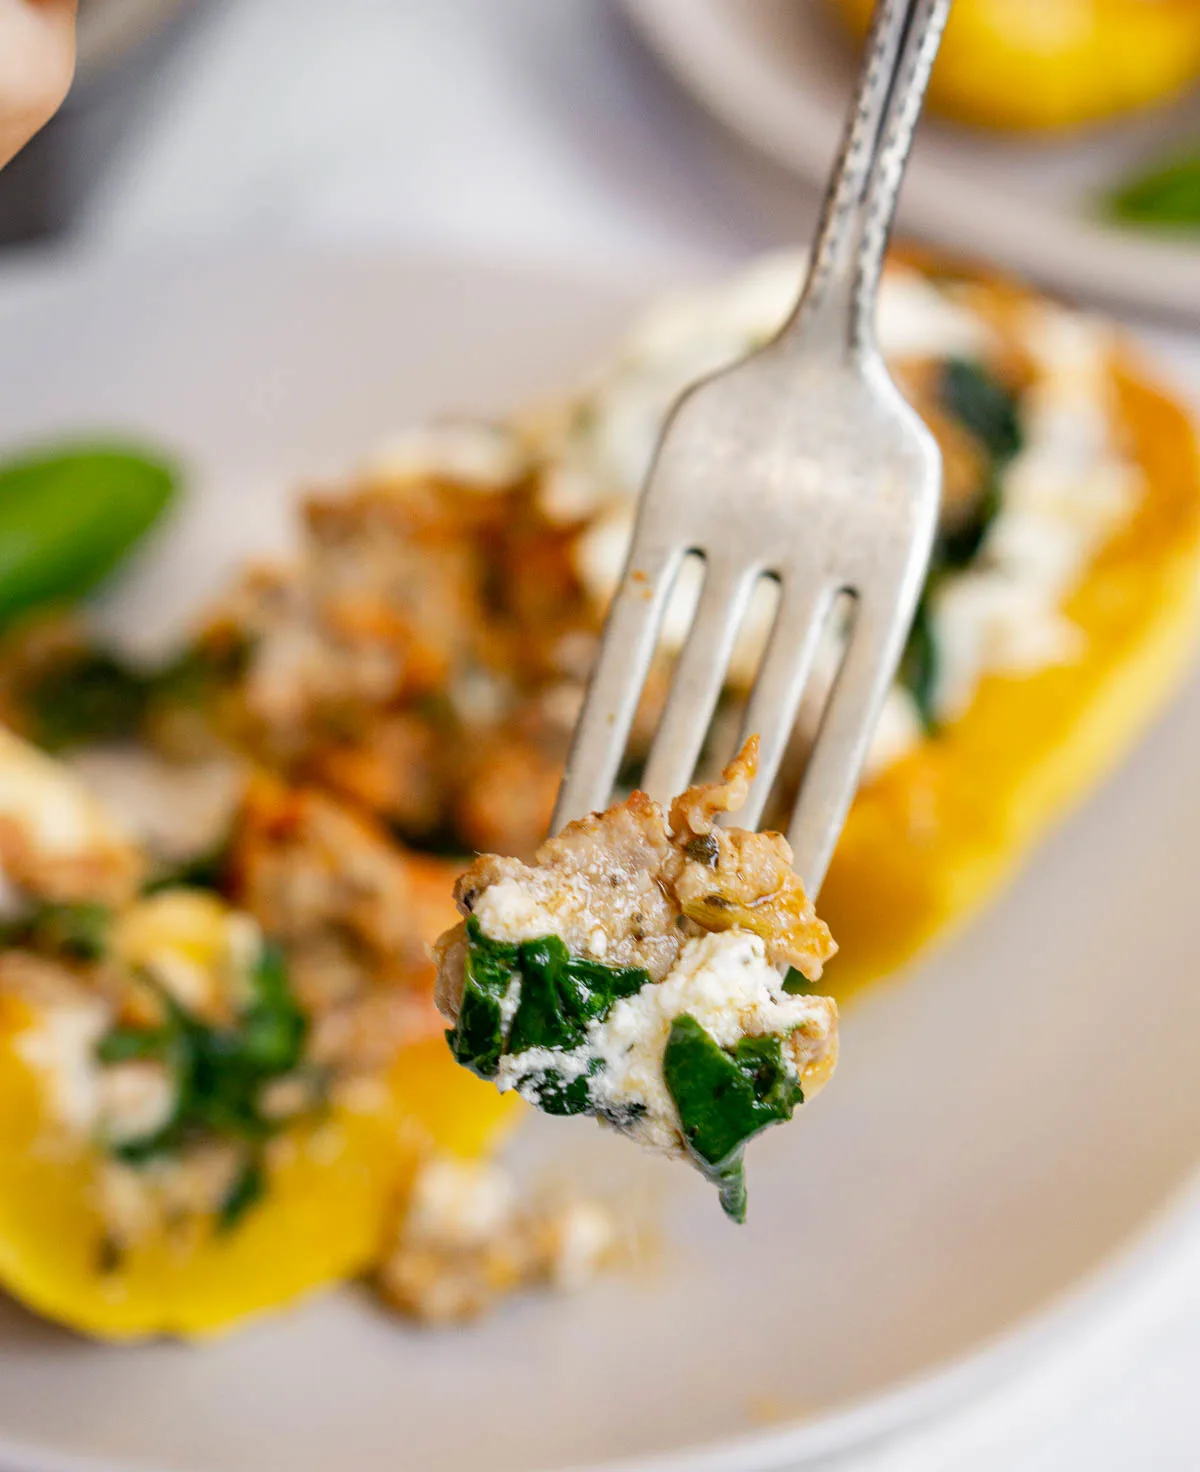 Piece of cooked Italian sausage, ricotta, and spinach on a fork.